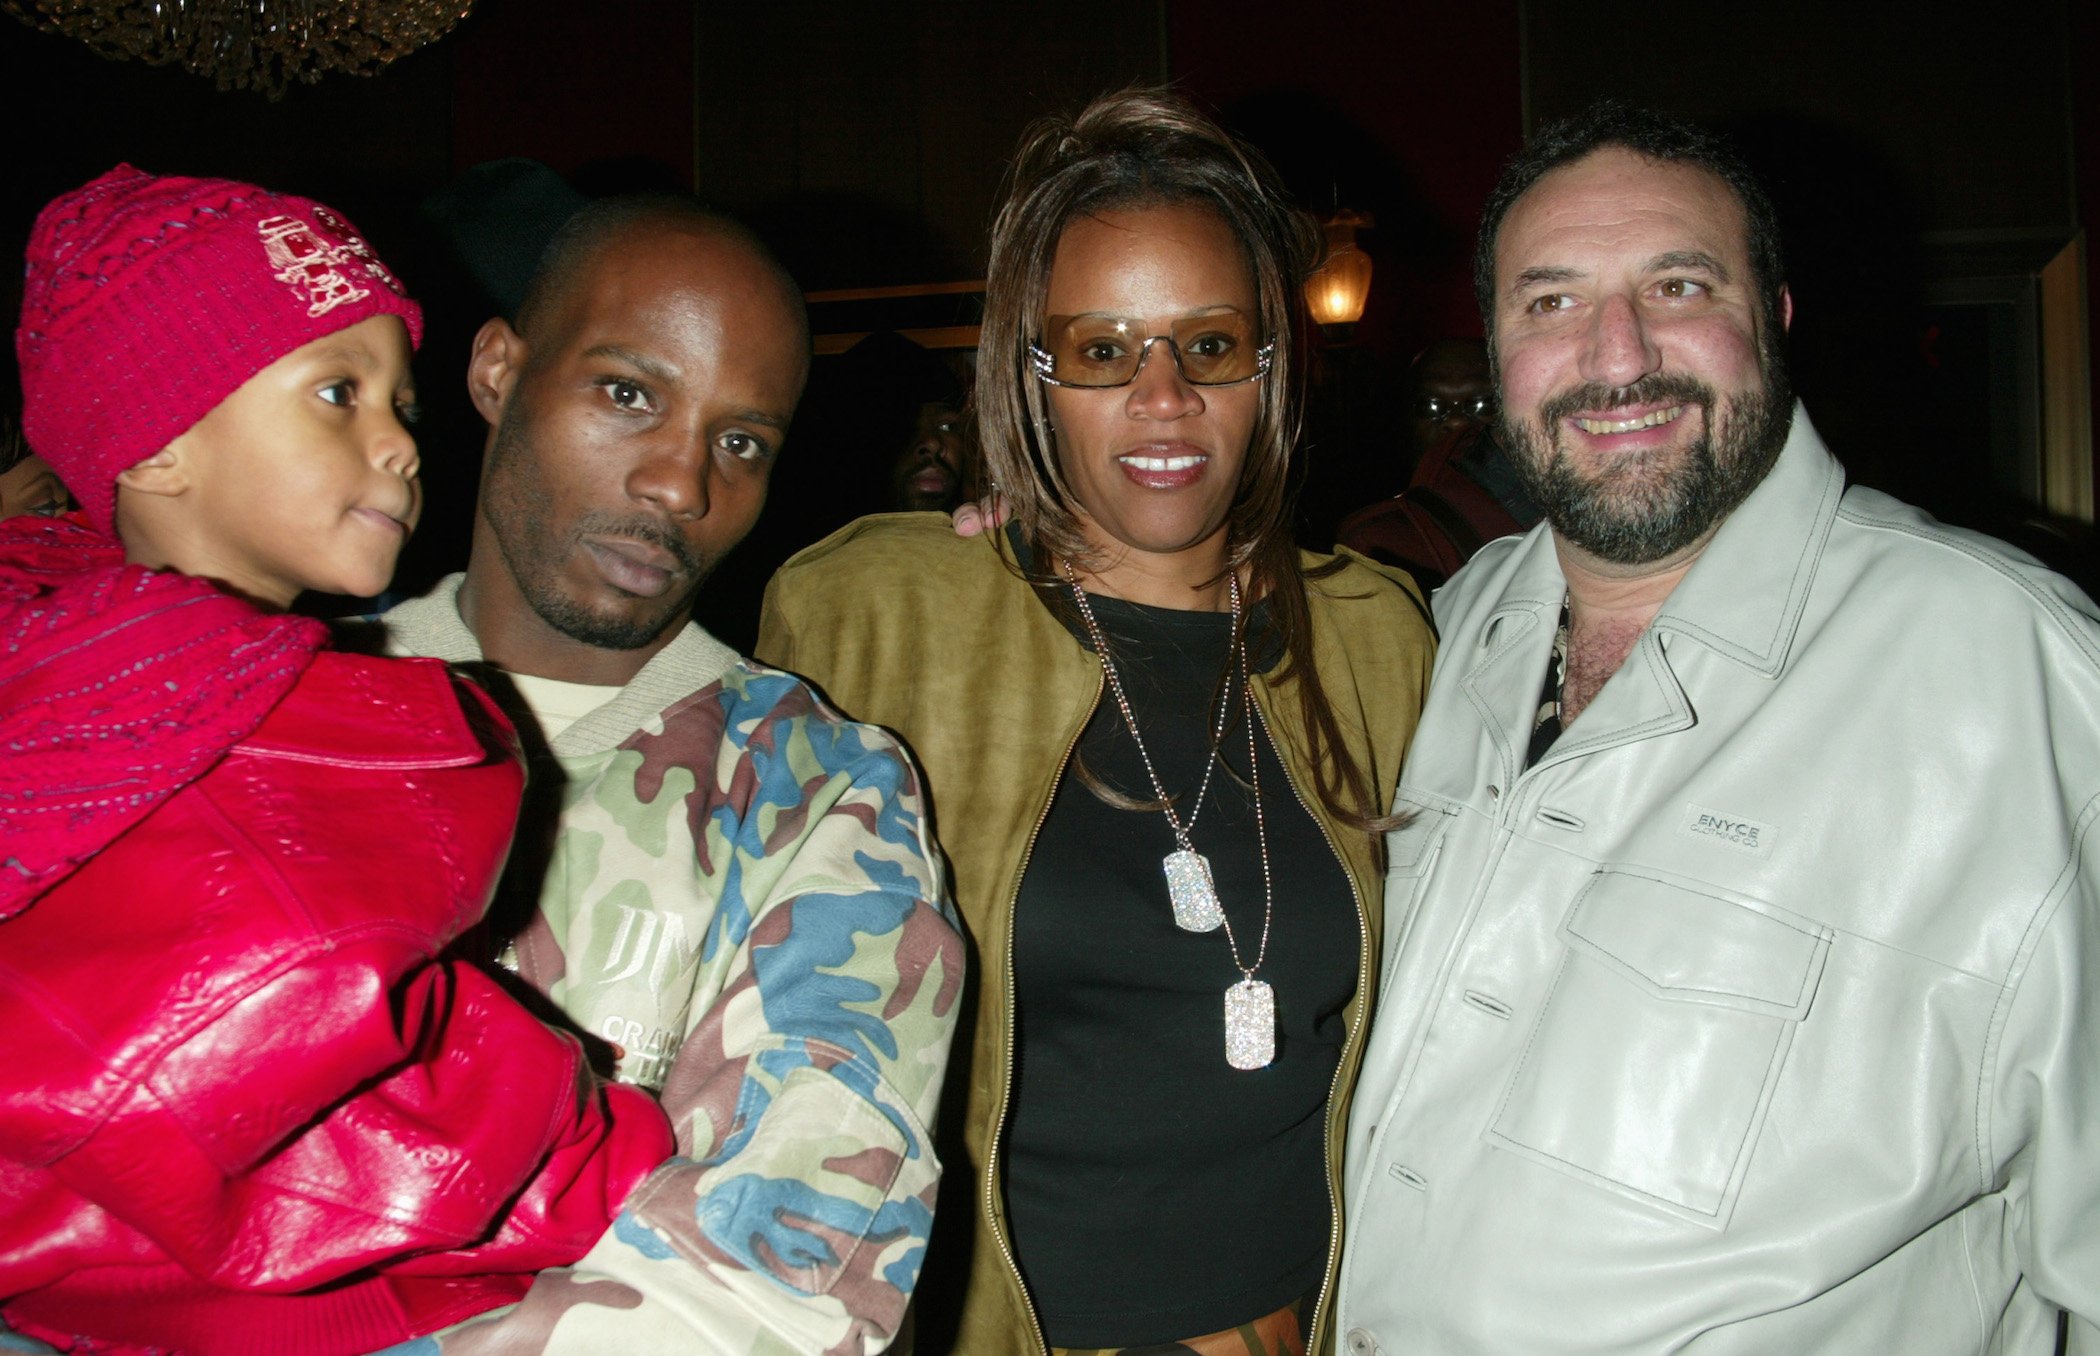 DMX's wife, Tashera Simmons, and his son standing with him at an event